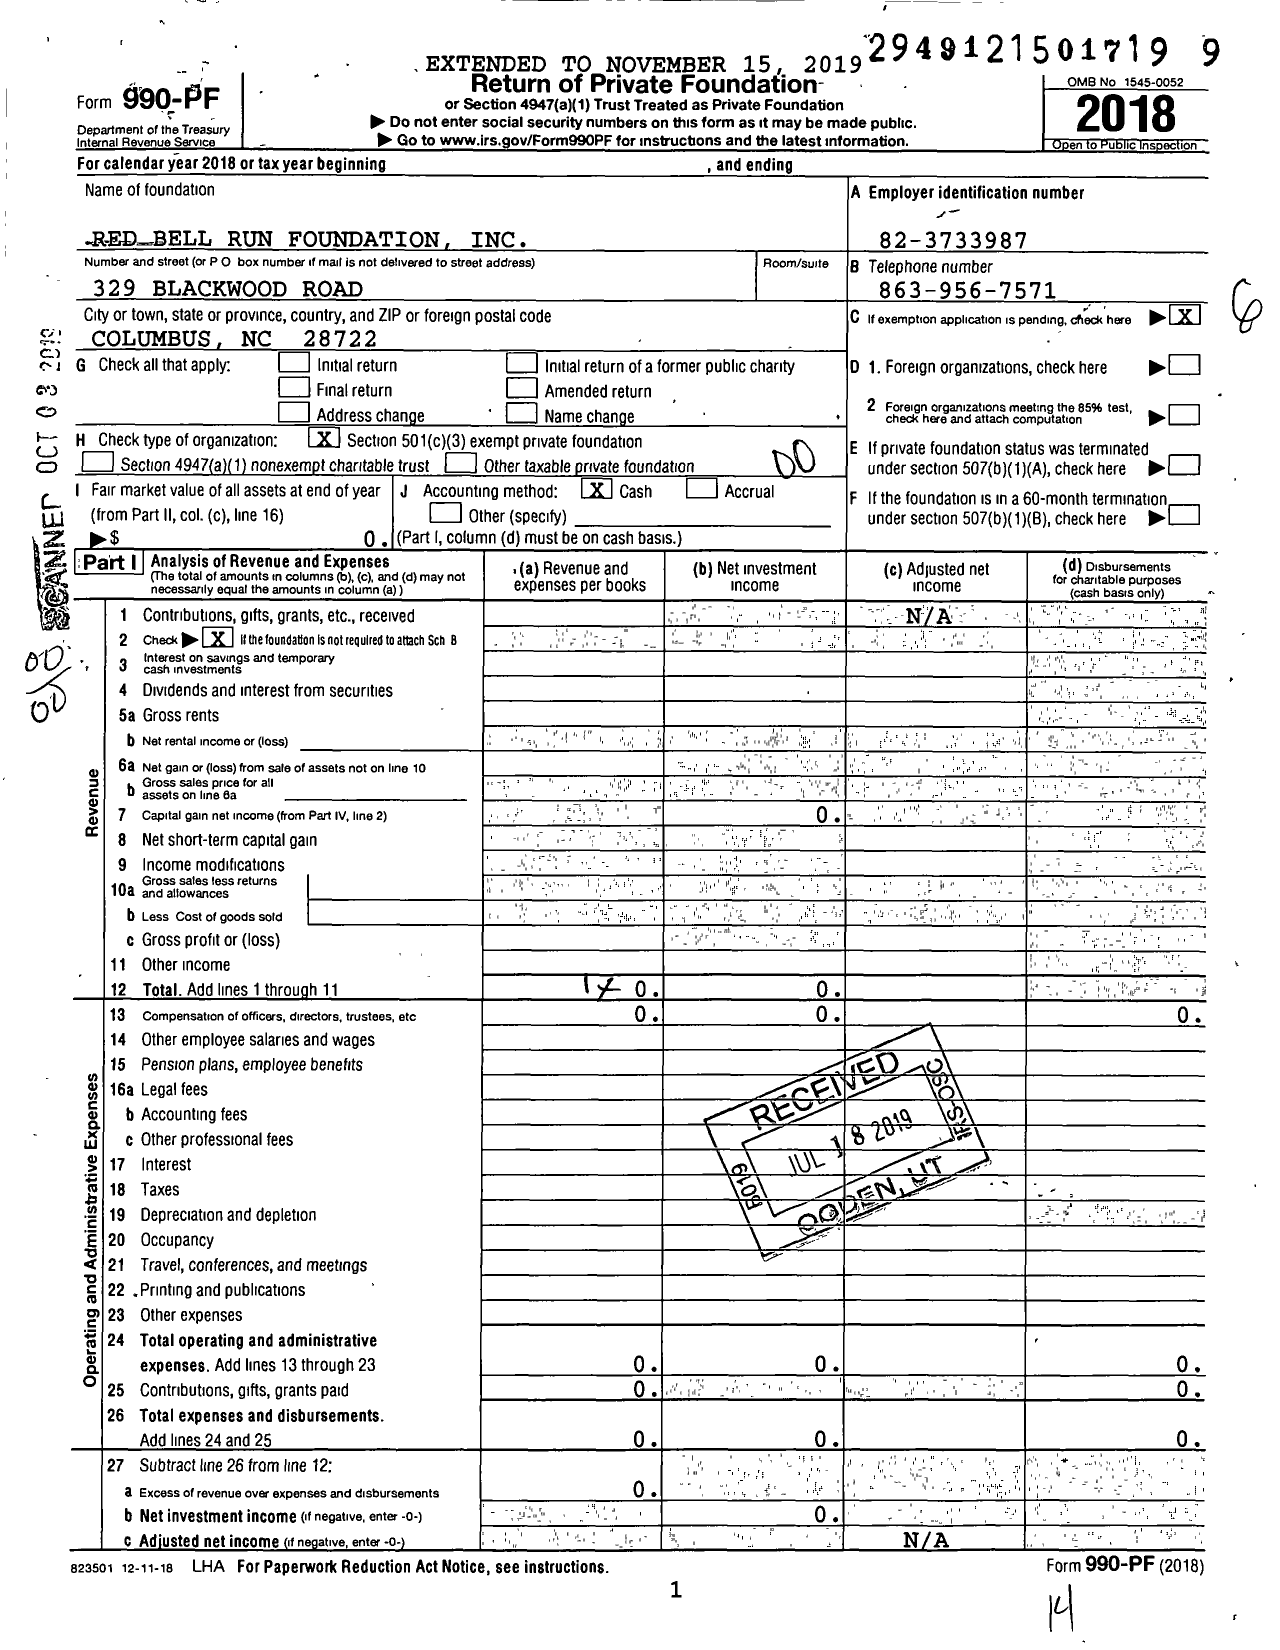 Image of first page of 2018 Form 990PF for Red Bell Run Foundation